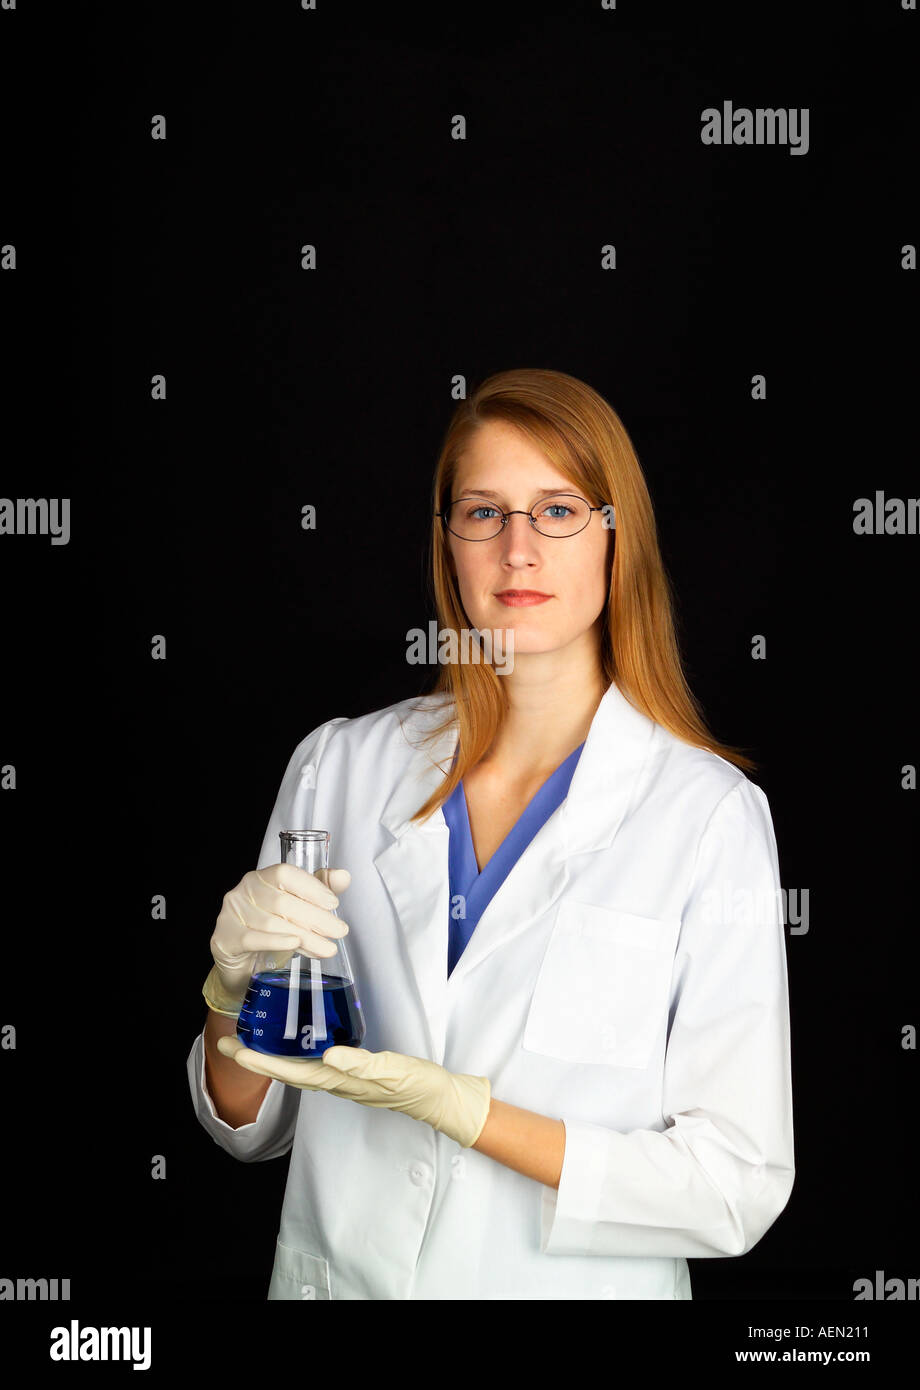 white-lab-coat-science-woman-female-red-hair-redhead-glasses-research-AEN211.jpg